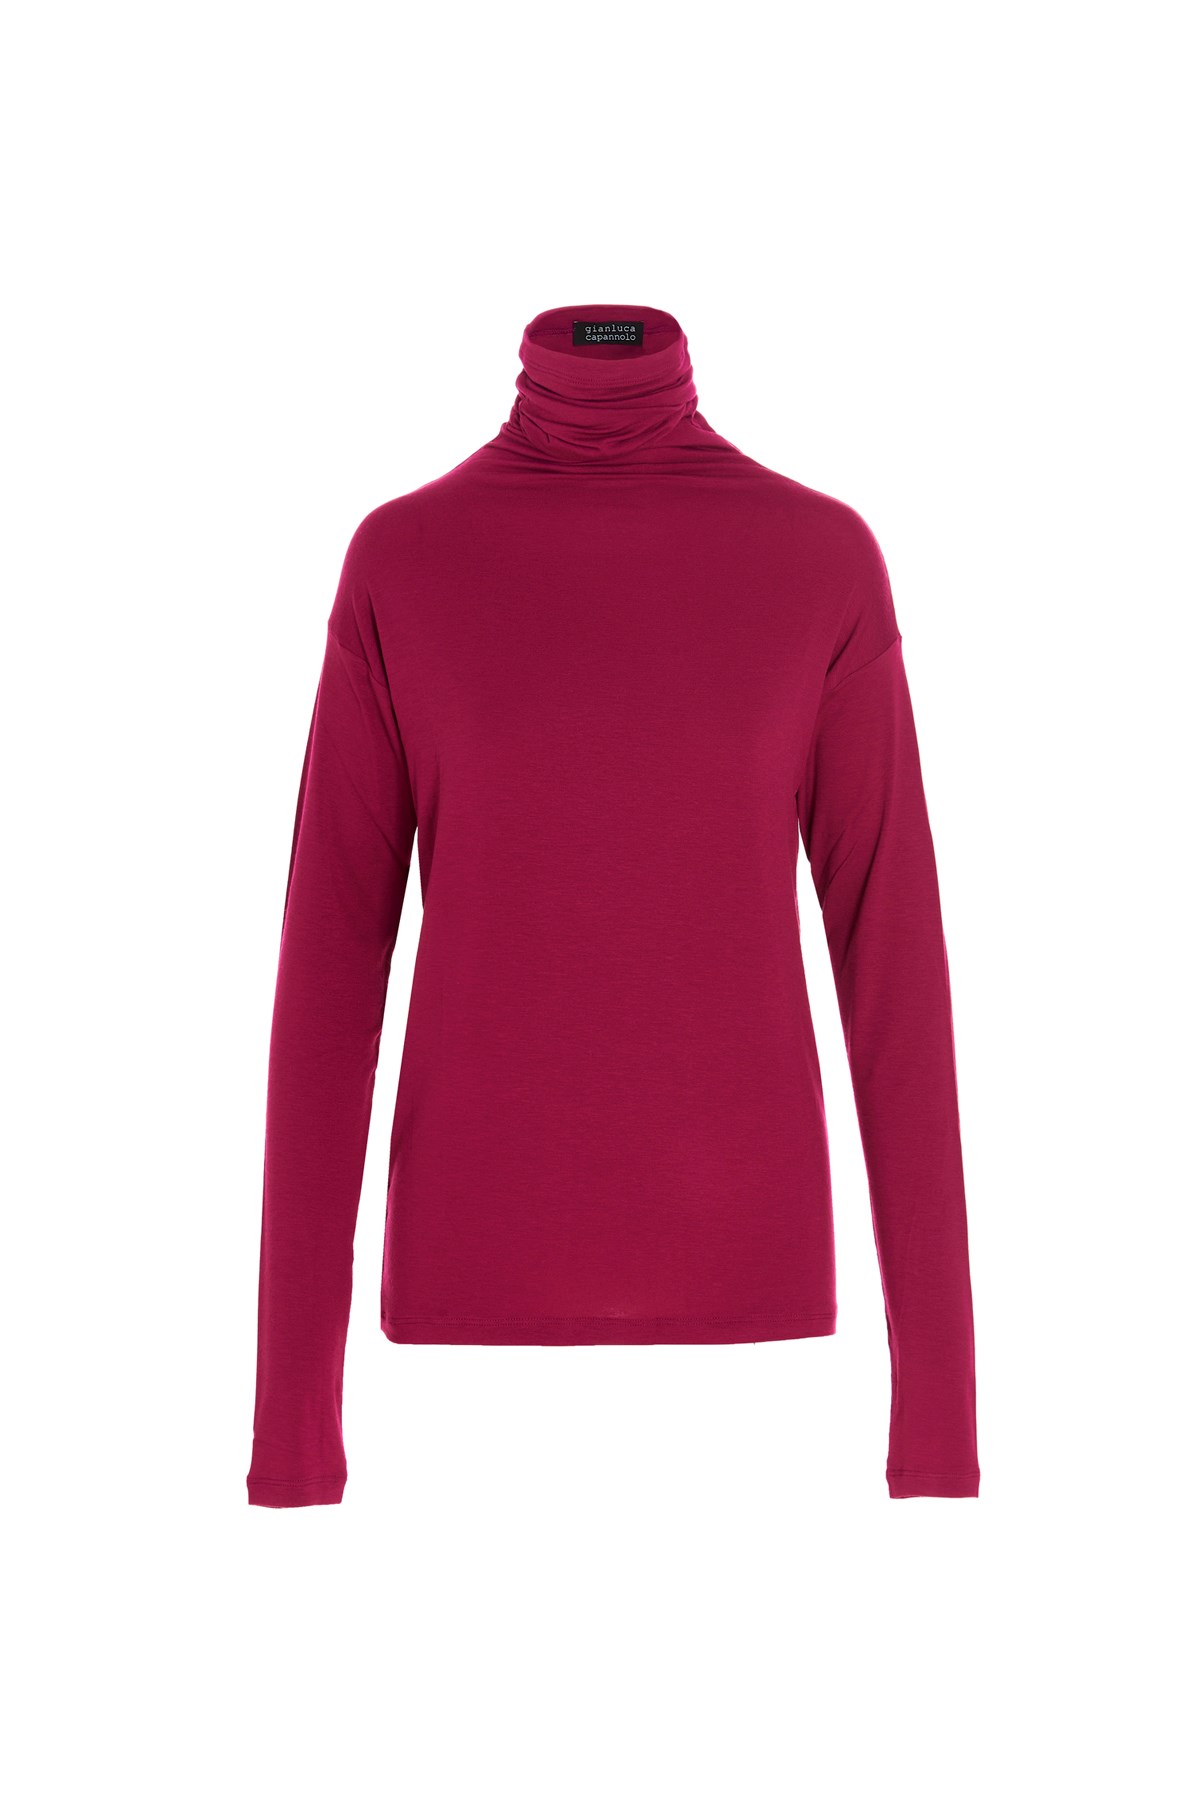 GIANLUCA CAPANNOLO Pullover 'Katerine'